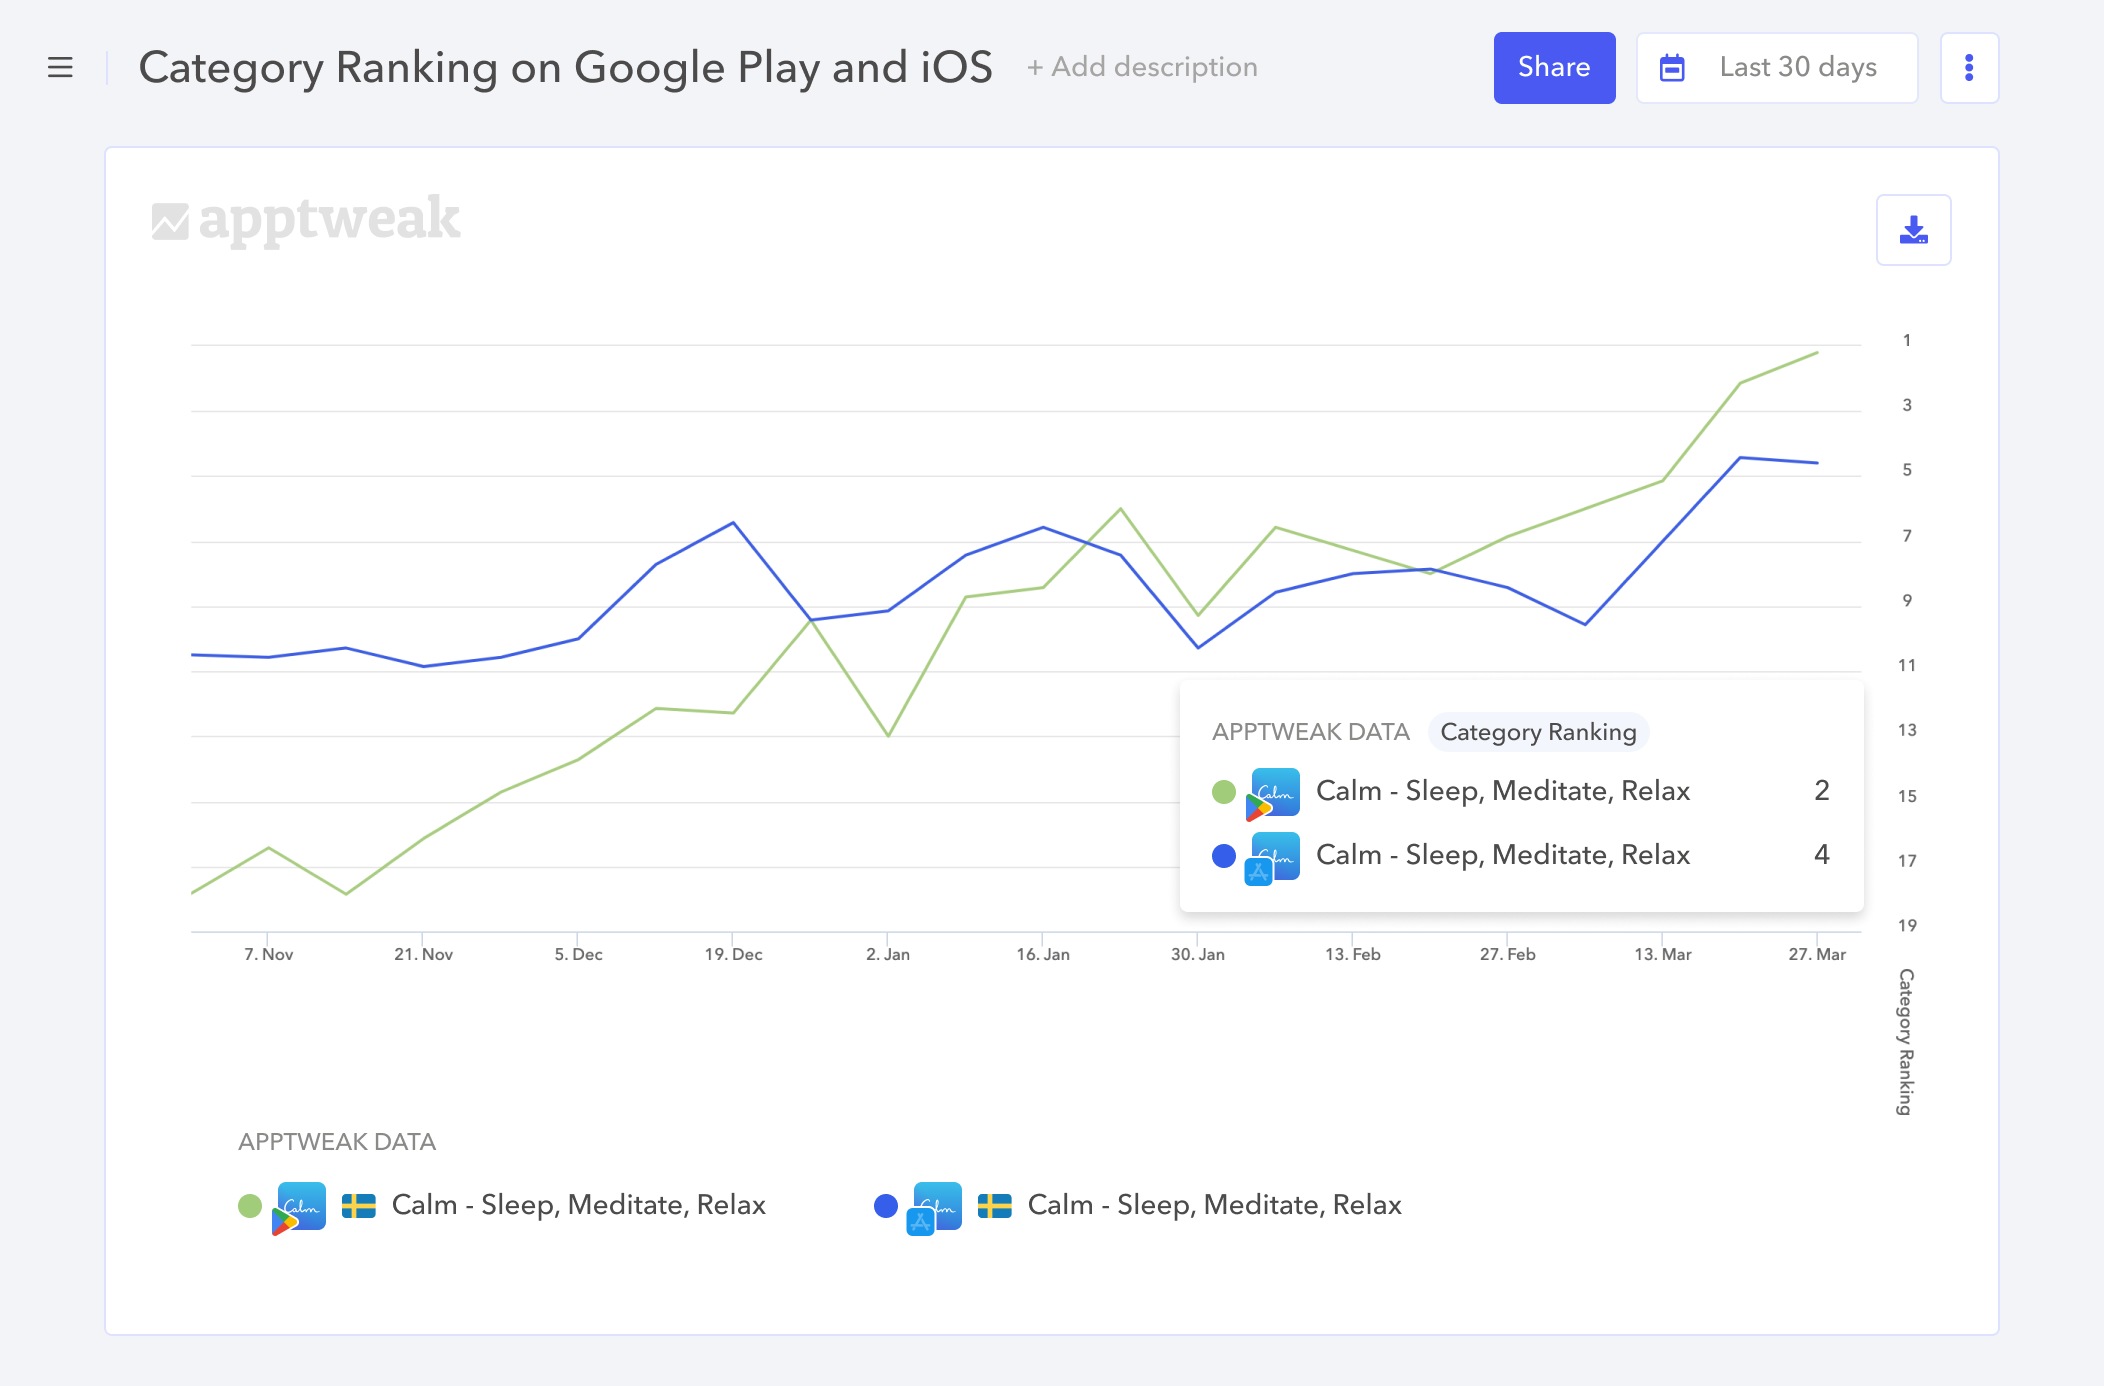 With Reporting Studio, plot app category ranking for multiple devices on the same graph.